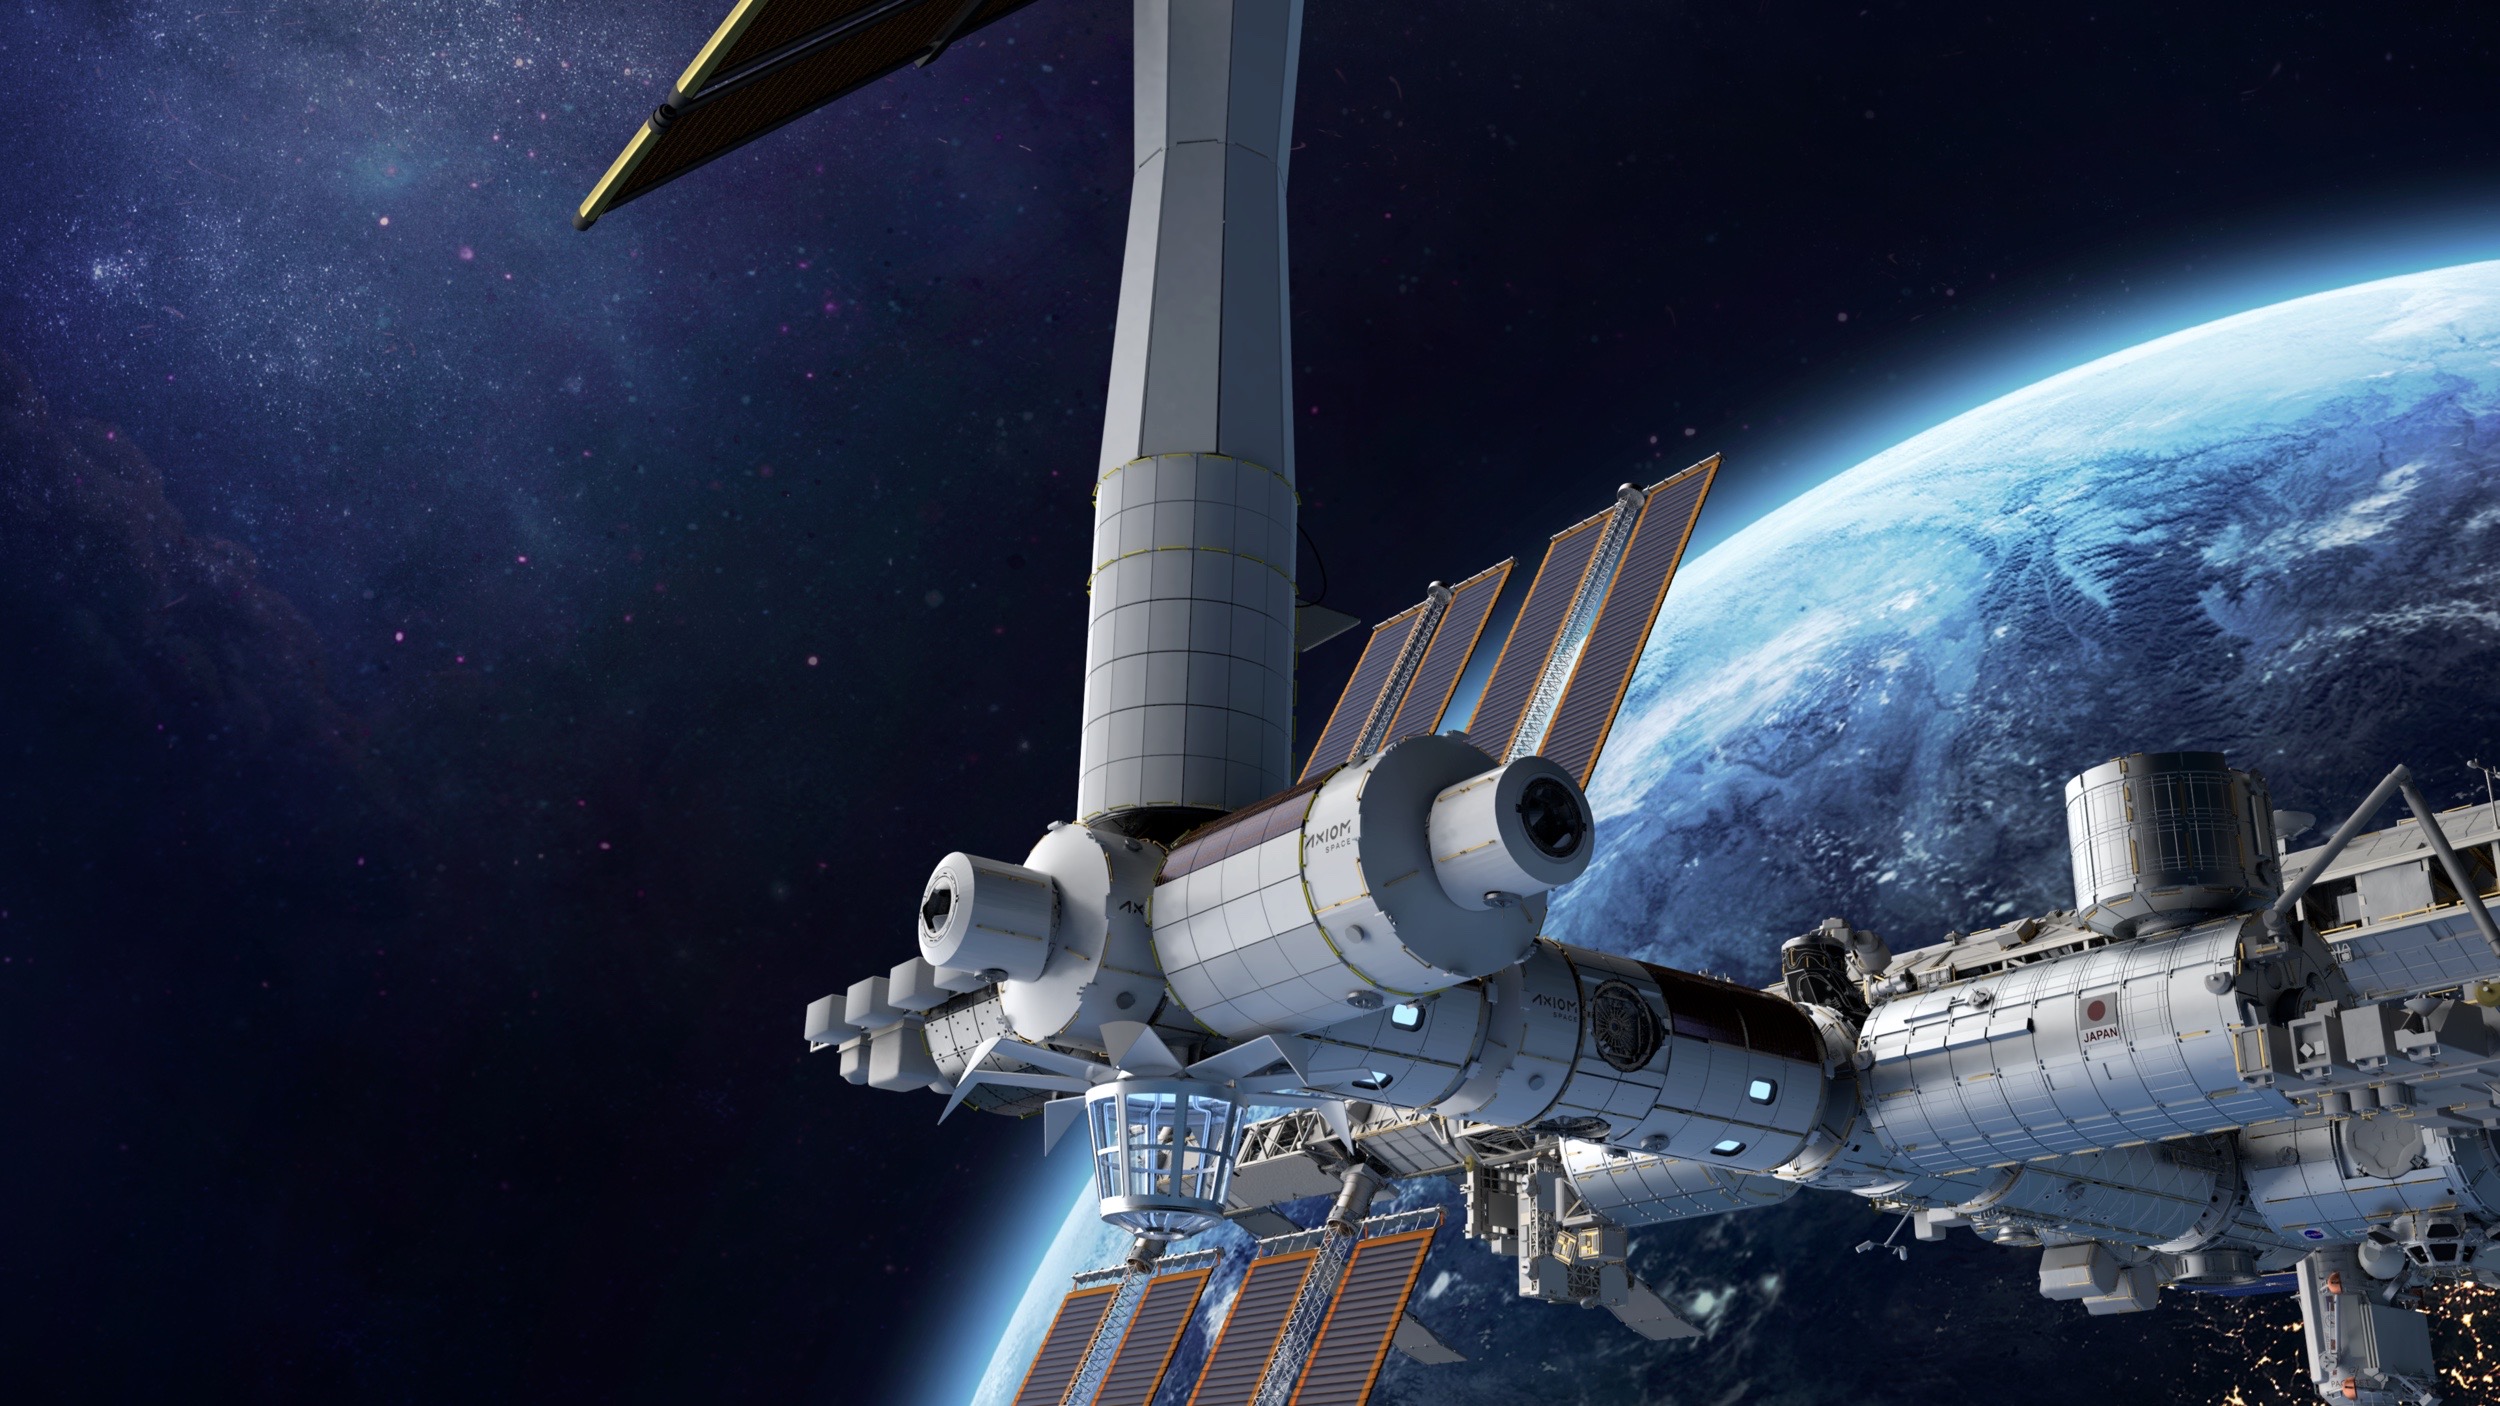 An artist's illustration of the space station that Houston-based Axiom Space plans to build in Earth orbit.